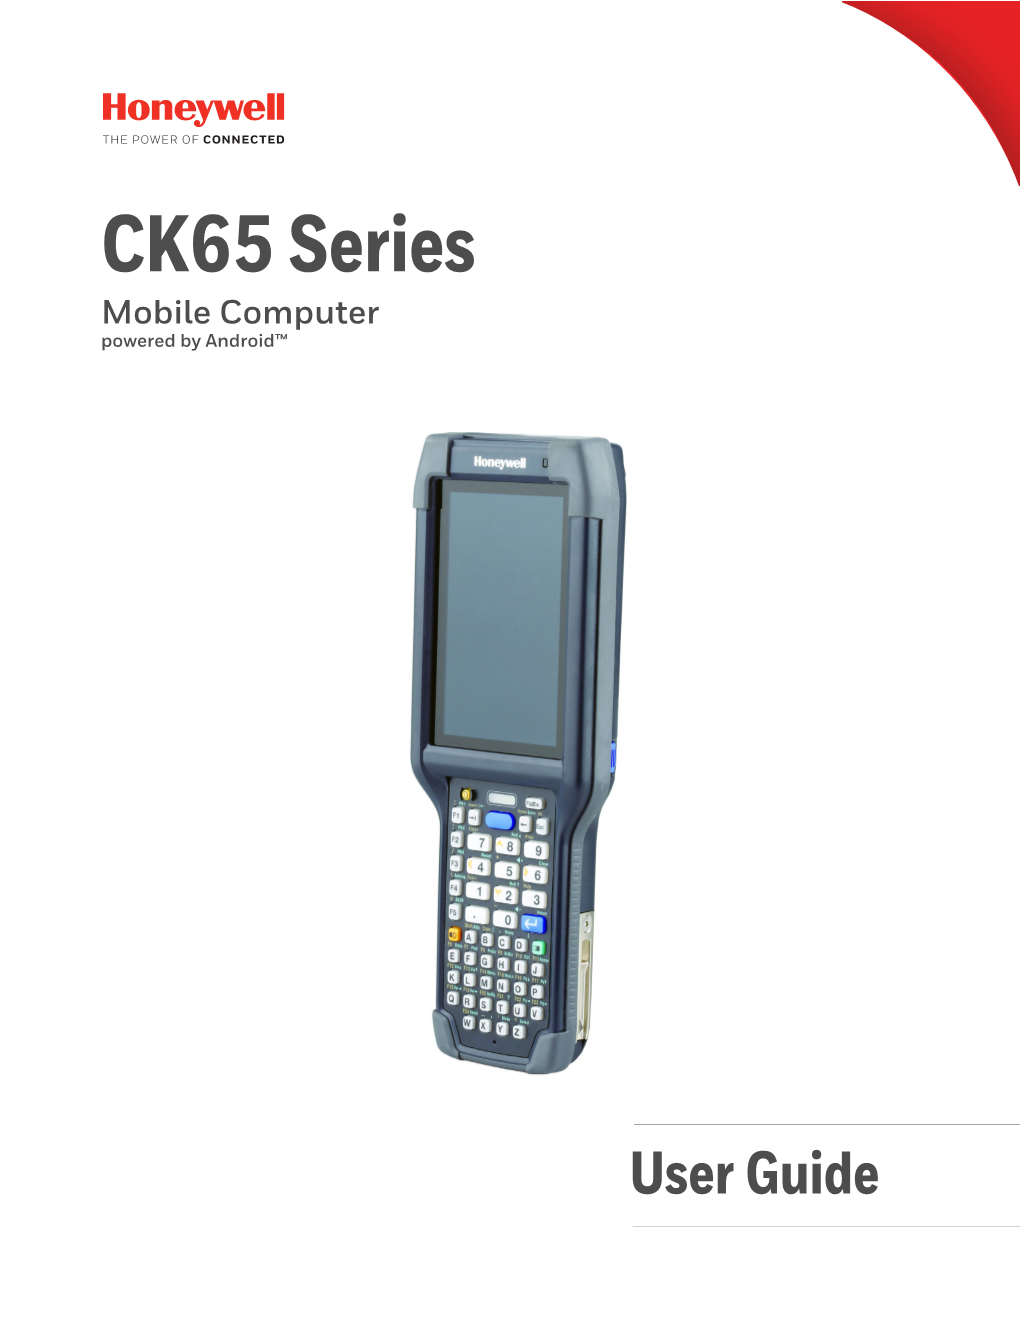 CK65 Series Mobile Computer User Guide, Powered By